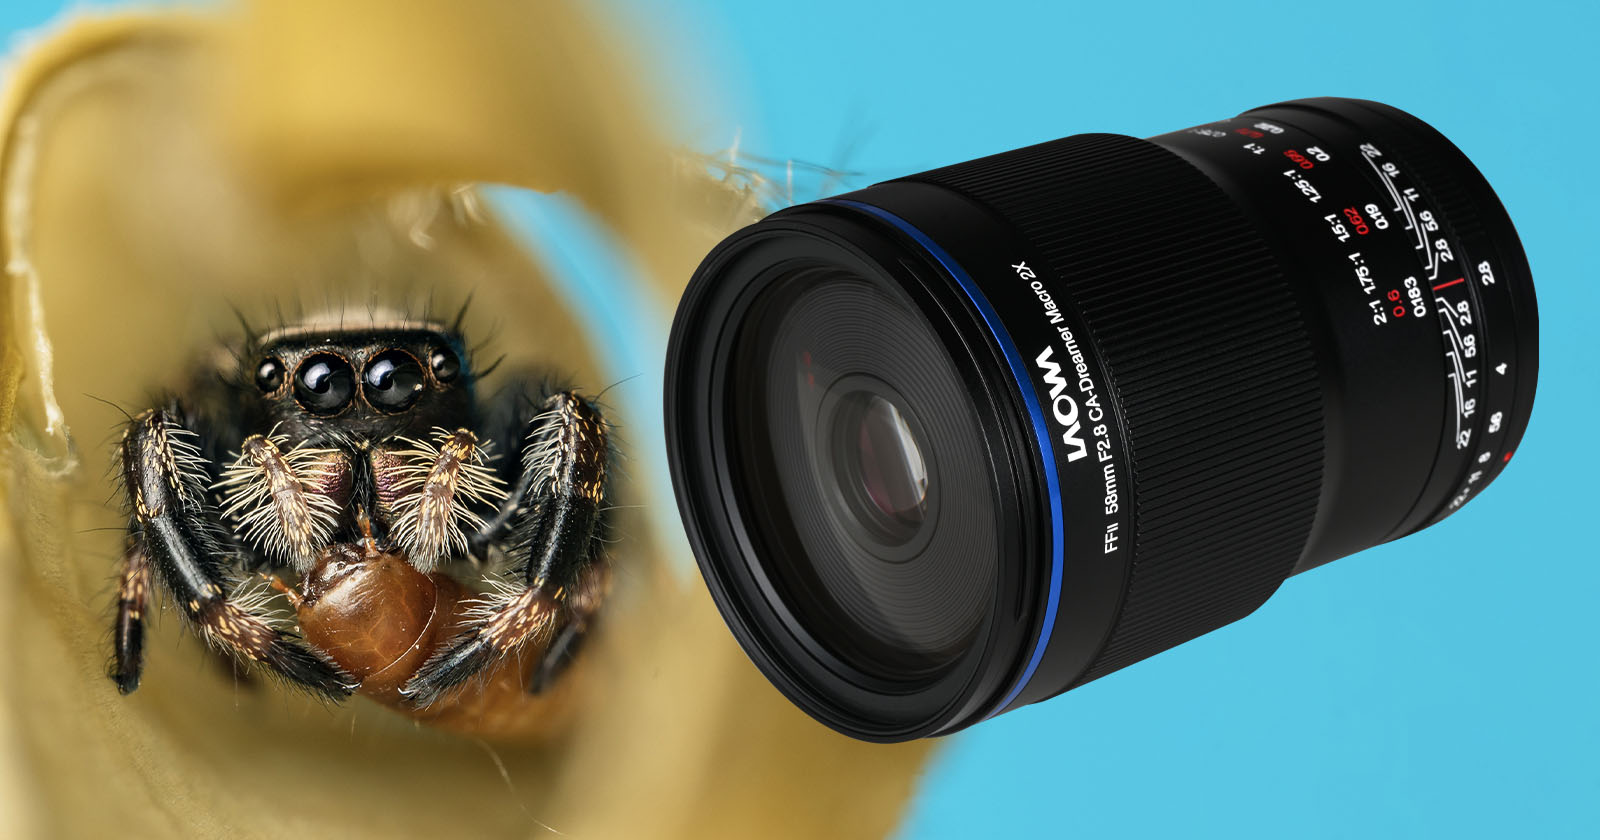 The New Laowa 58mm f/2.8 2X Ultra Macro APO is Made for Mirrorless